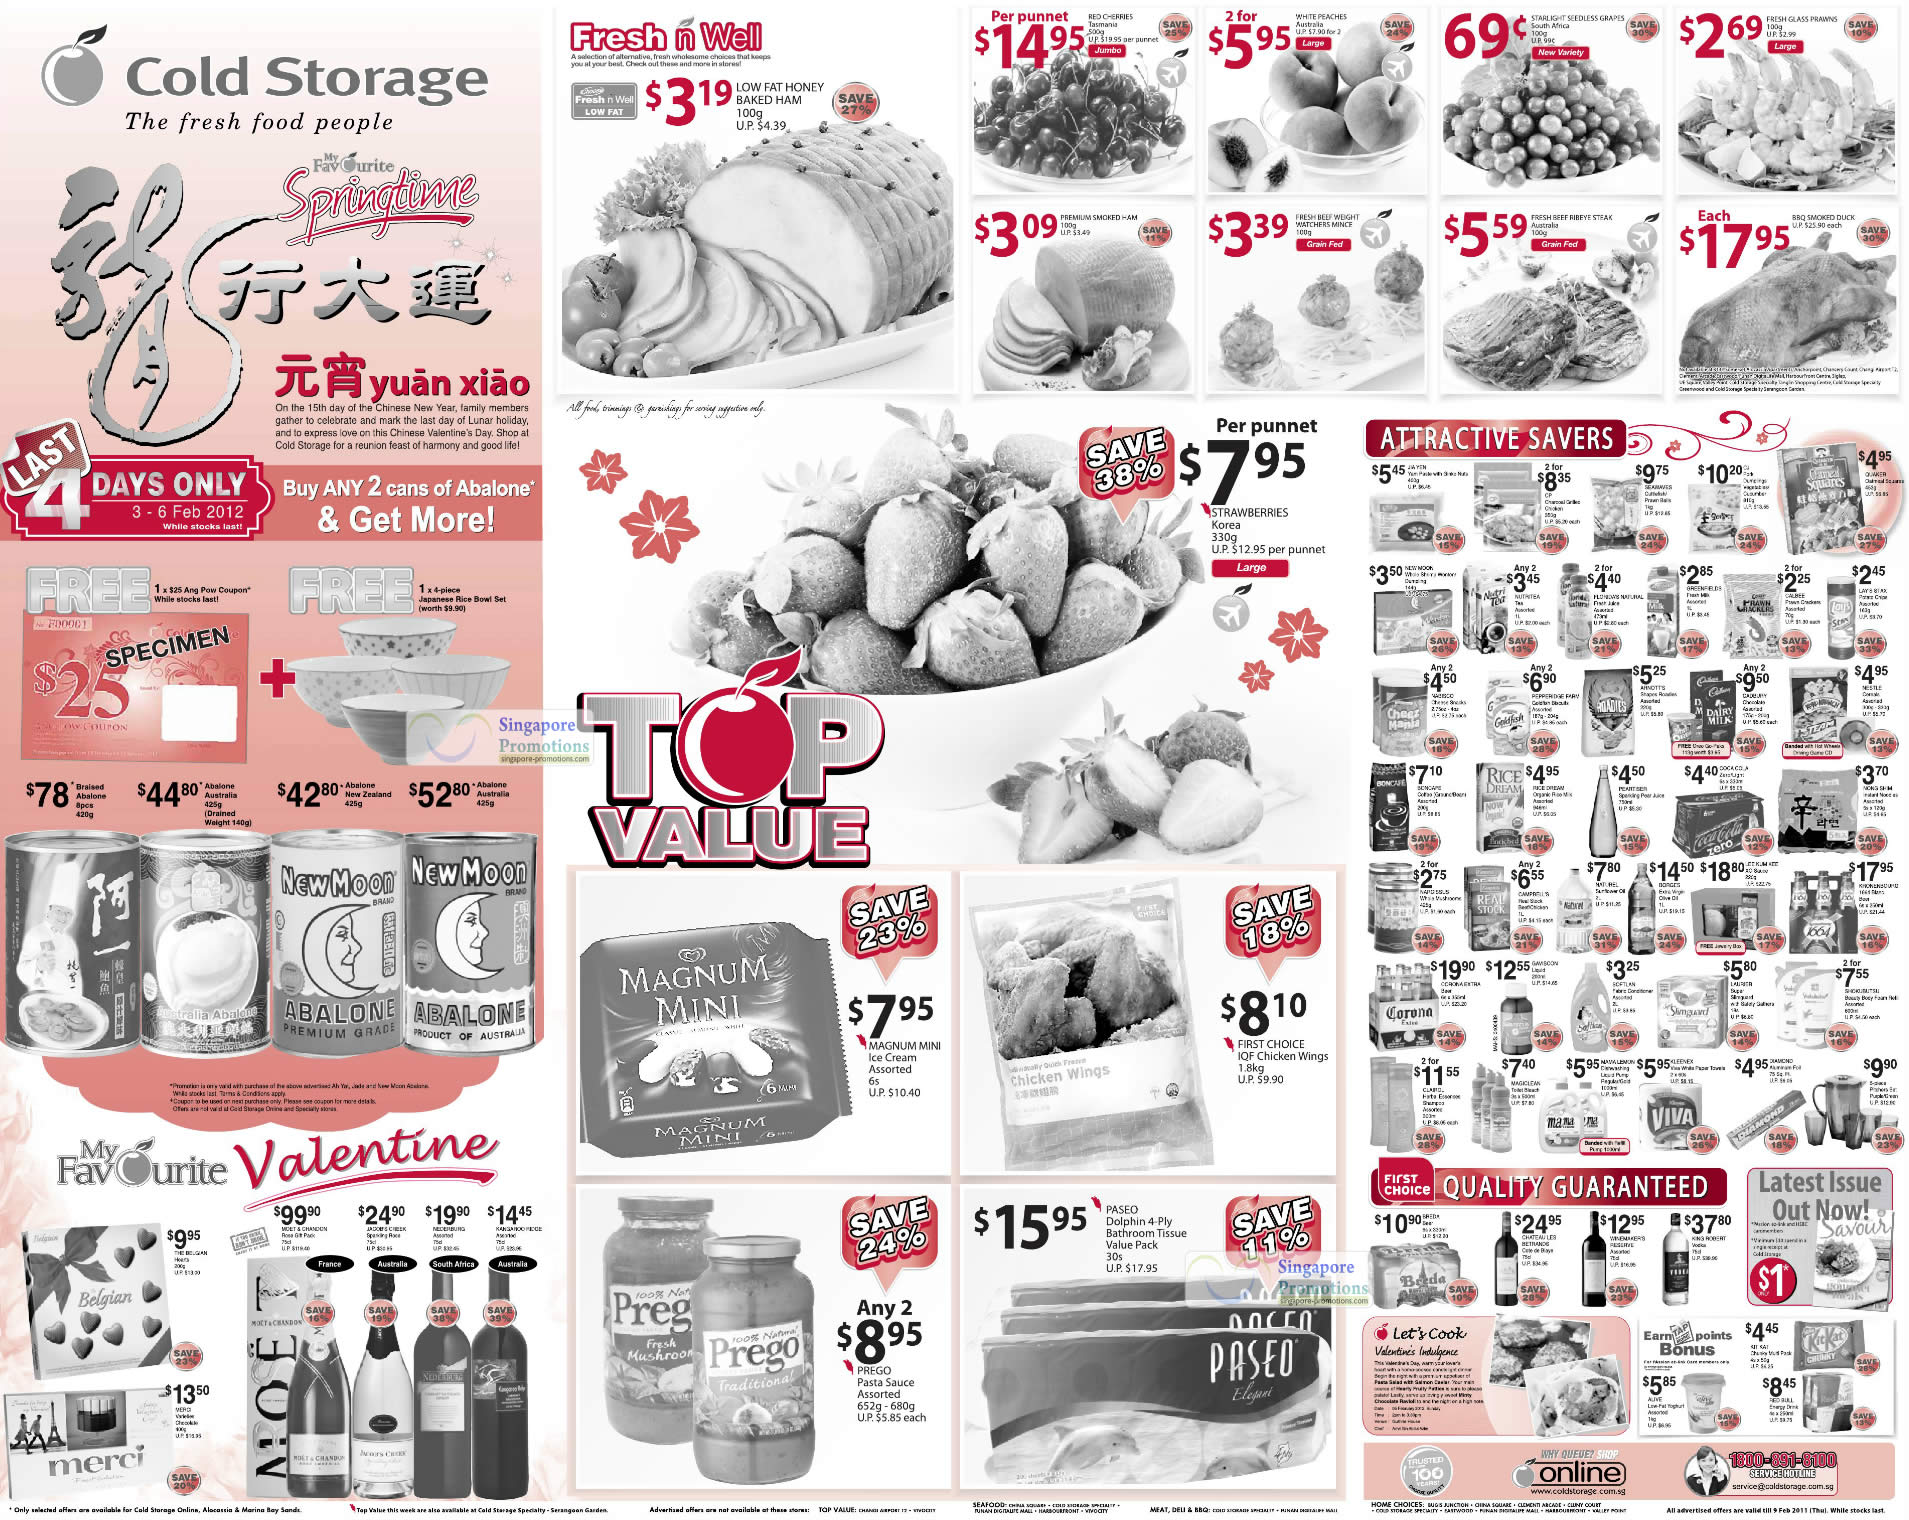 Featured image for Cold Storage Abalone, Baby & Grocery Offers 3 - 9 Feb 2012